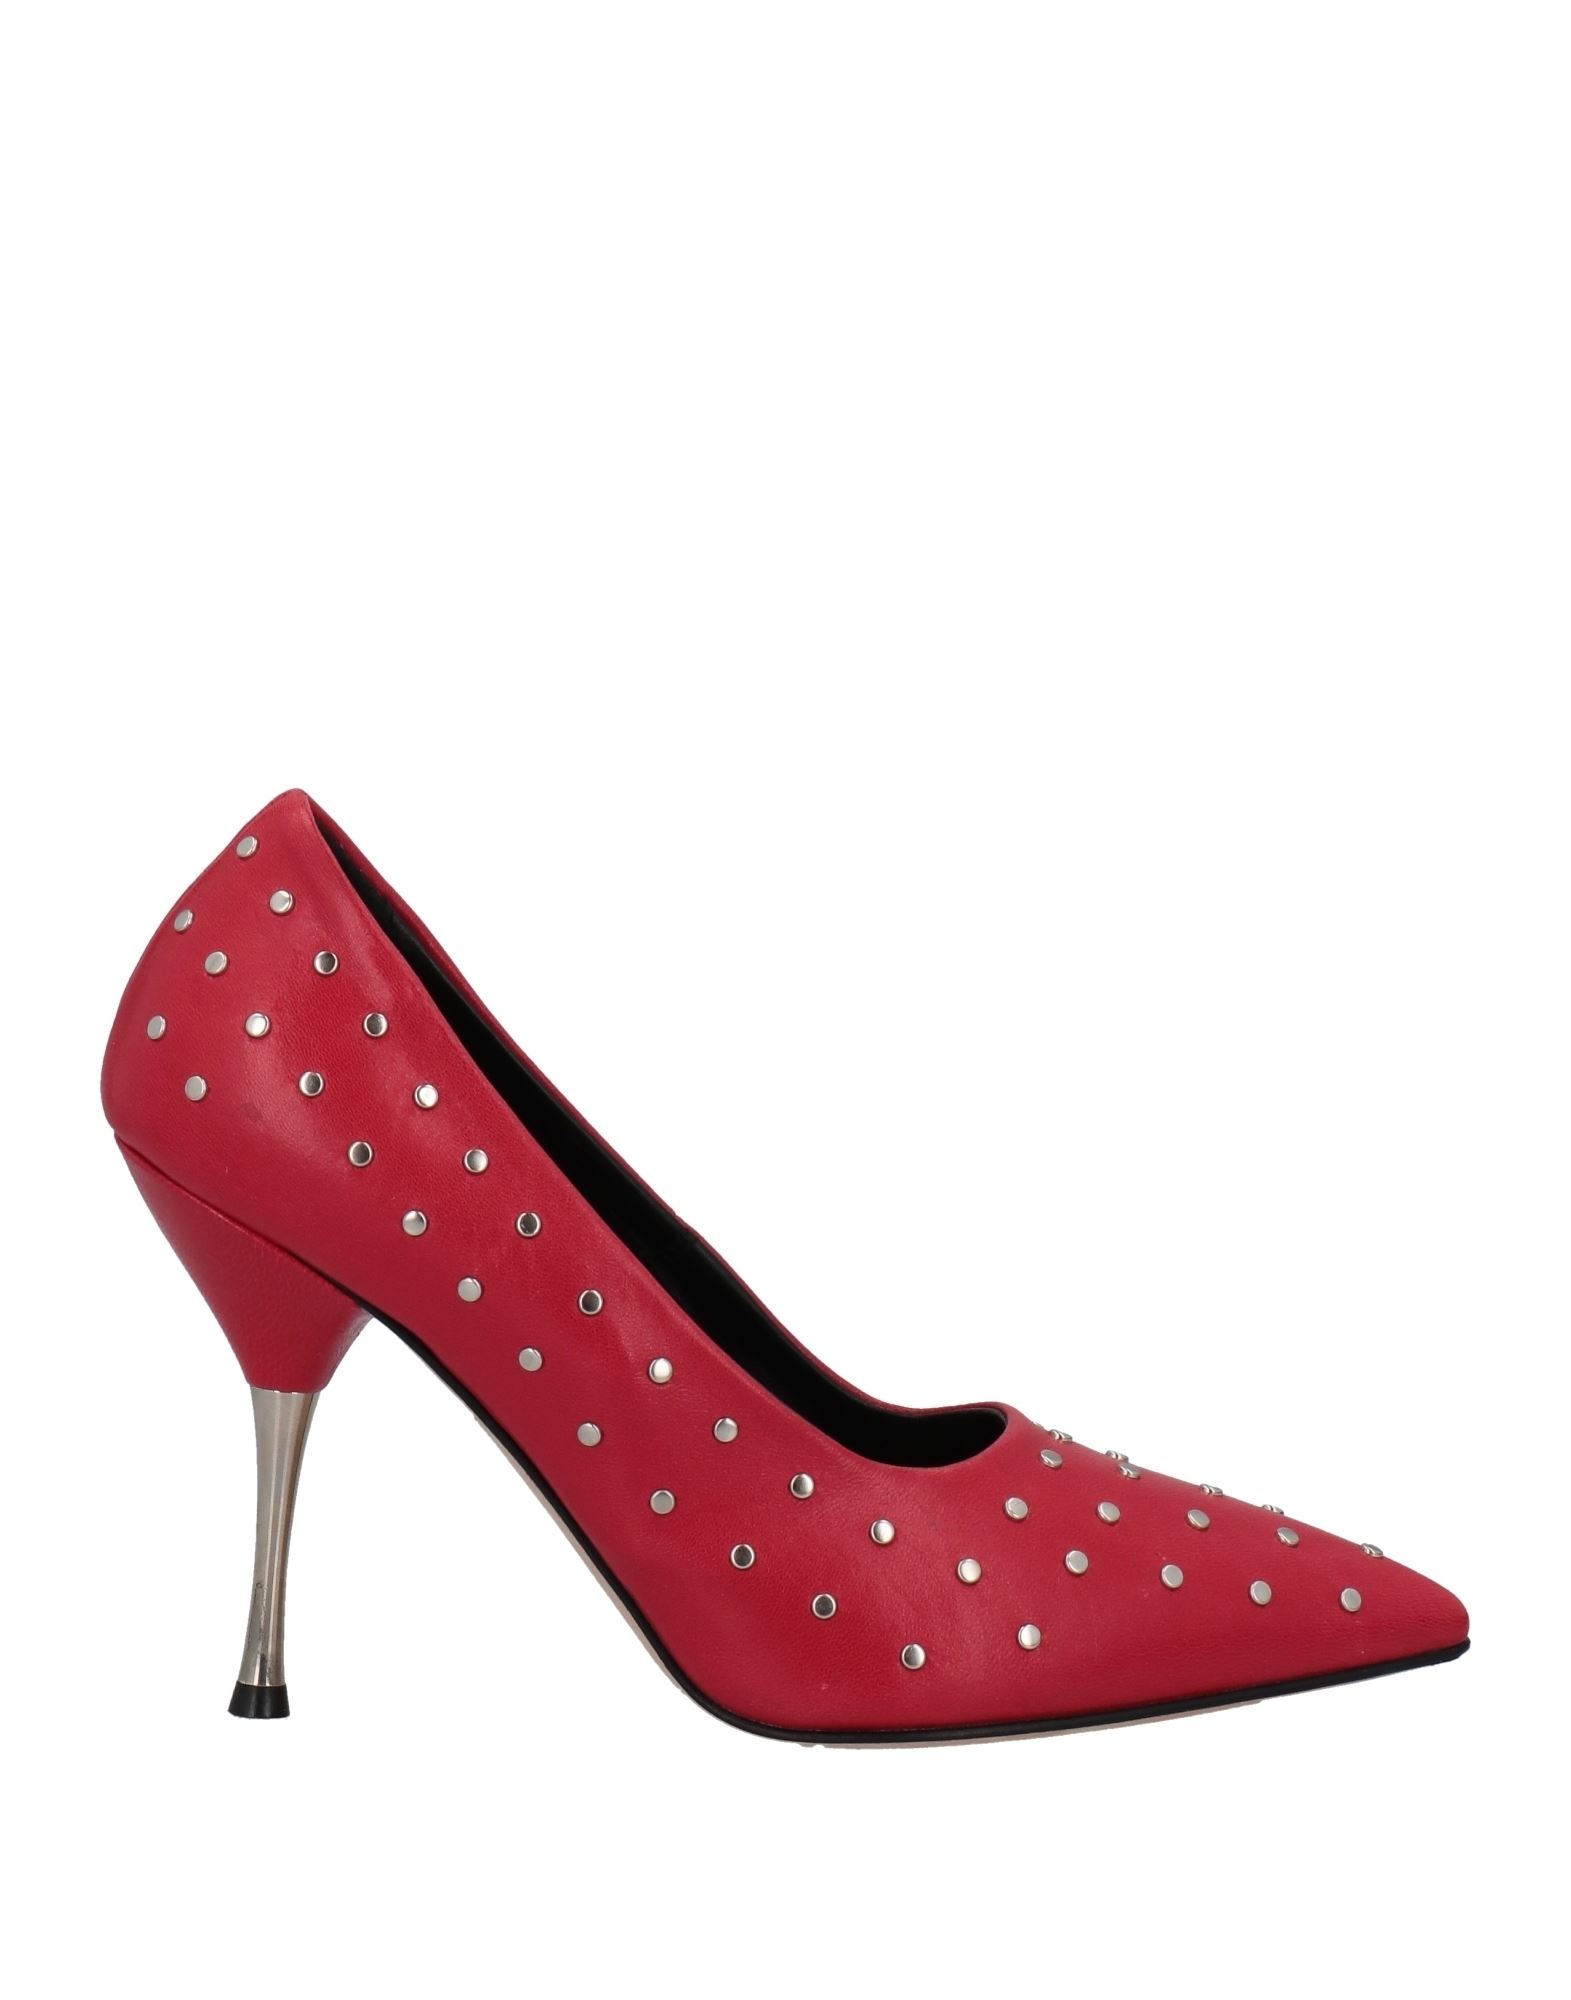 Nora Barth Pumps In Red